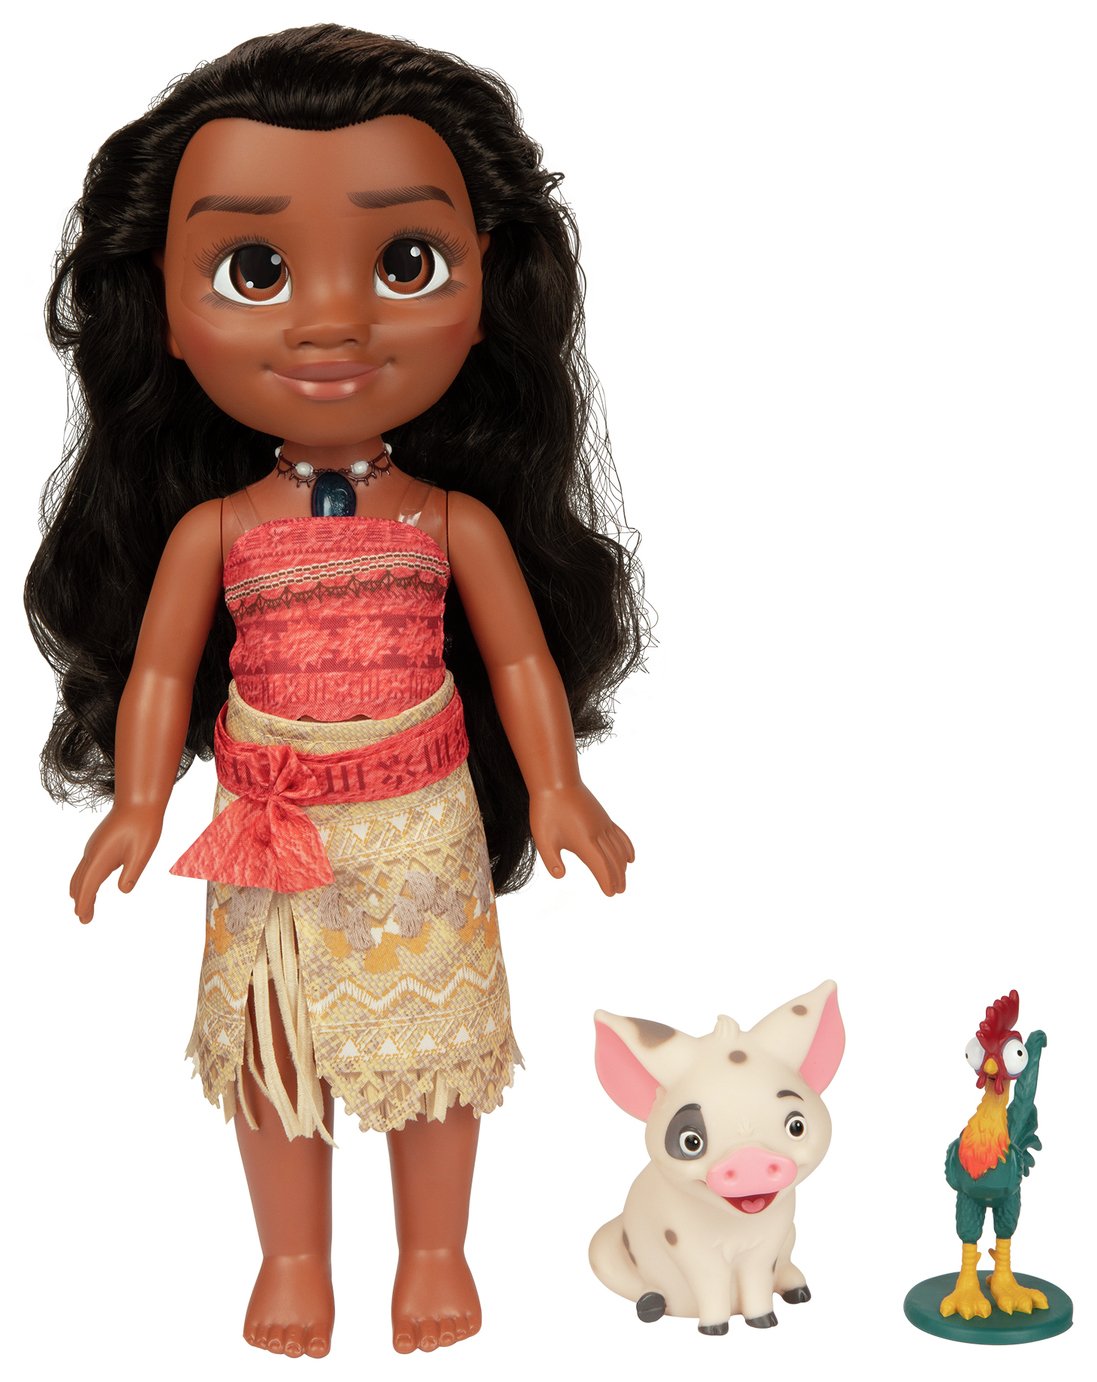 moana singing and friends feature doll